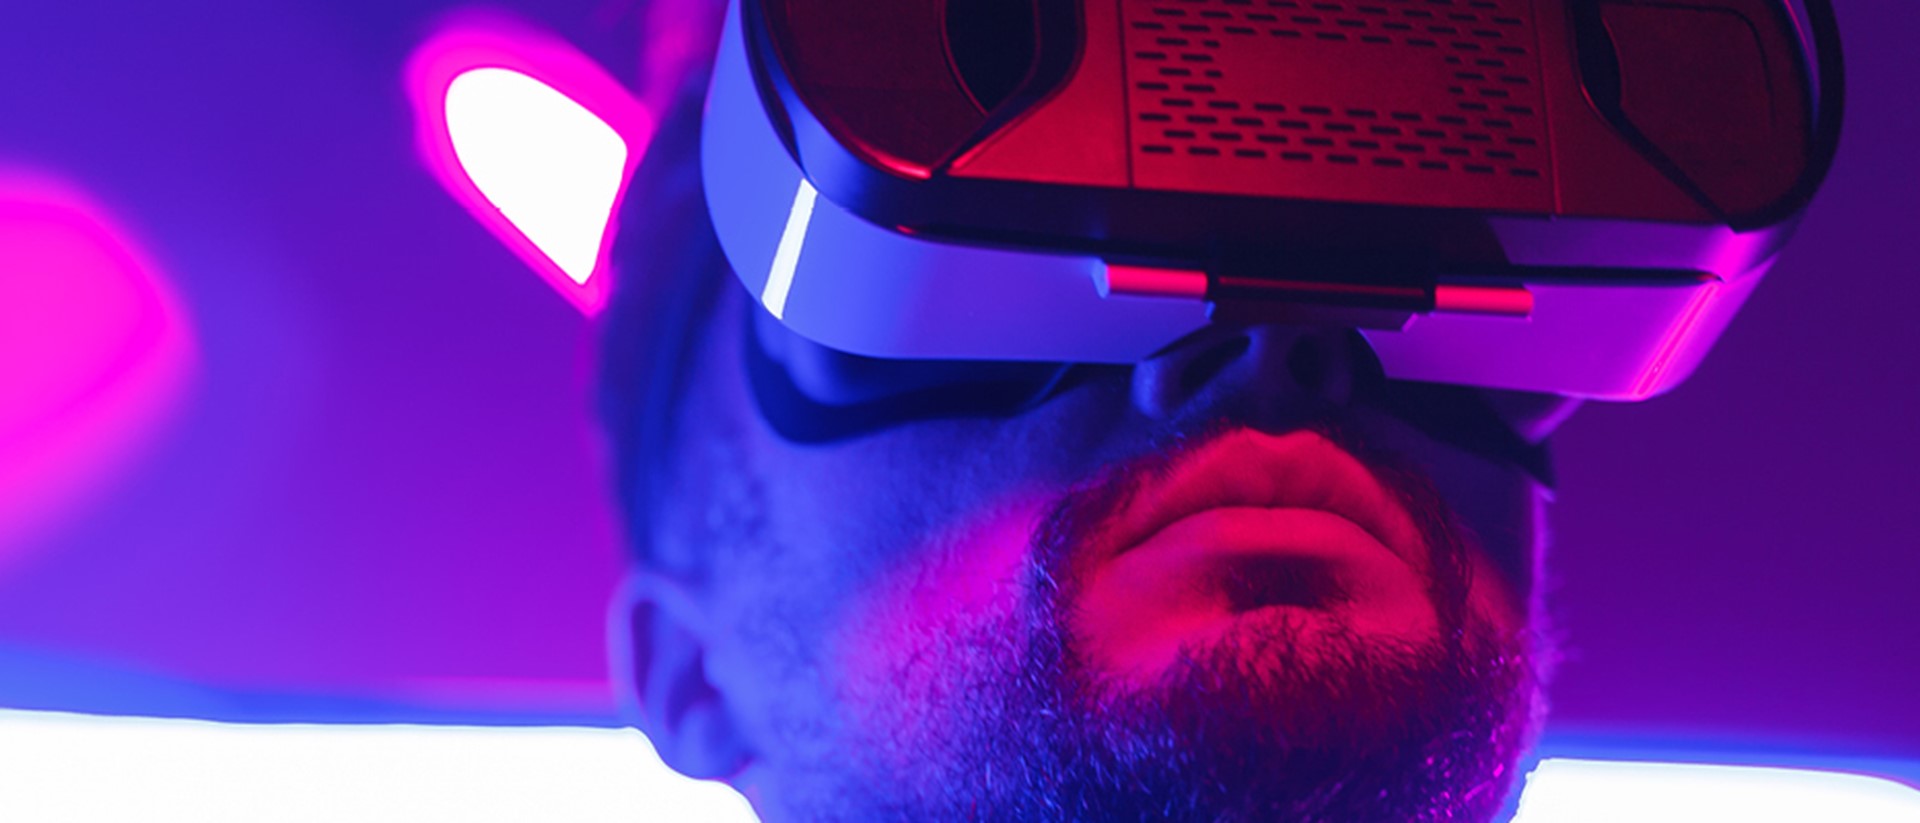 Image of a man with a virtual reality headset with a purple background